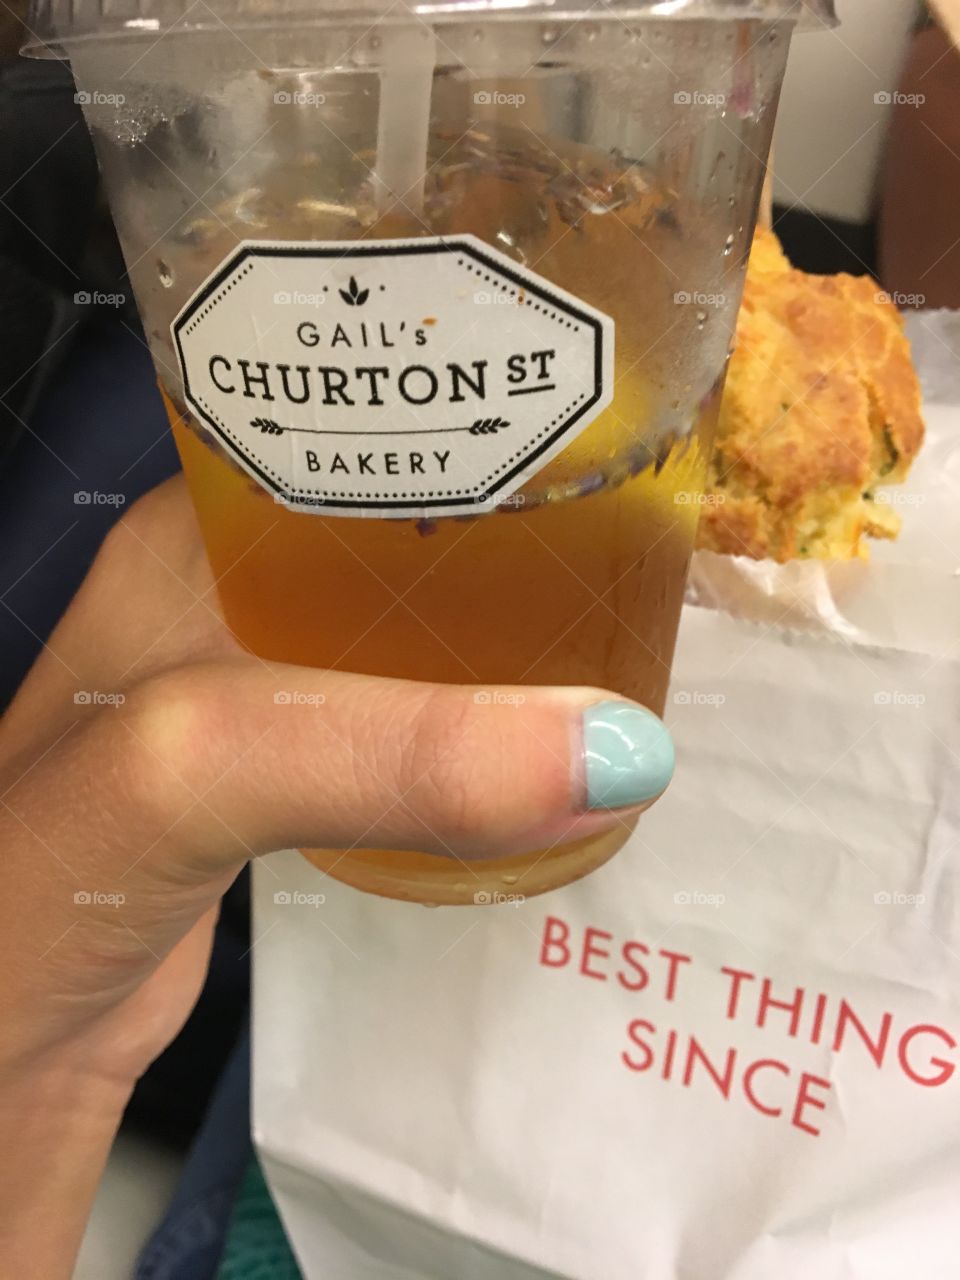 Scone and iced tea from a London Bakery